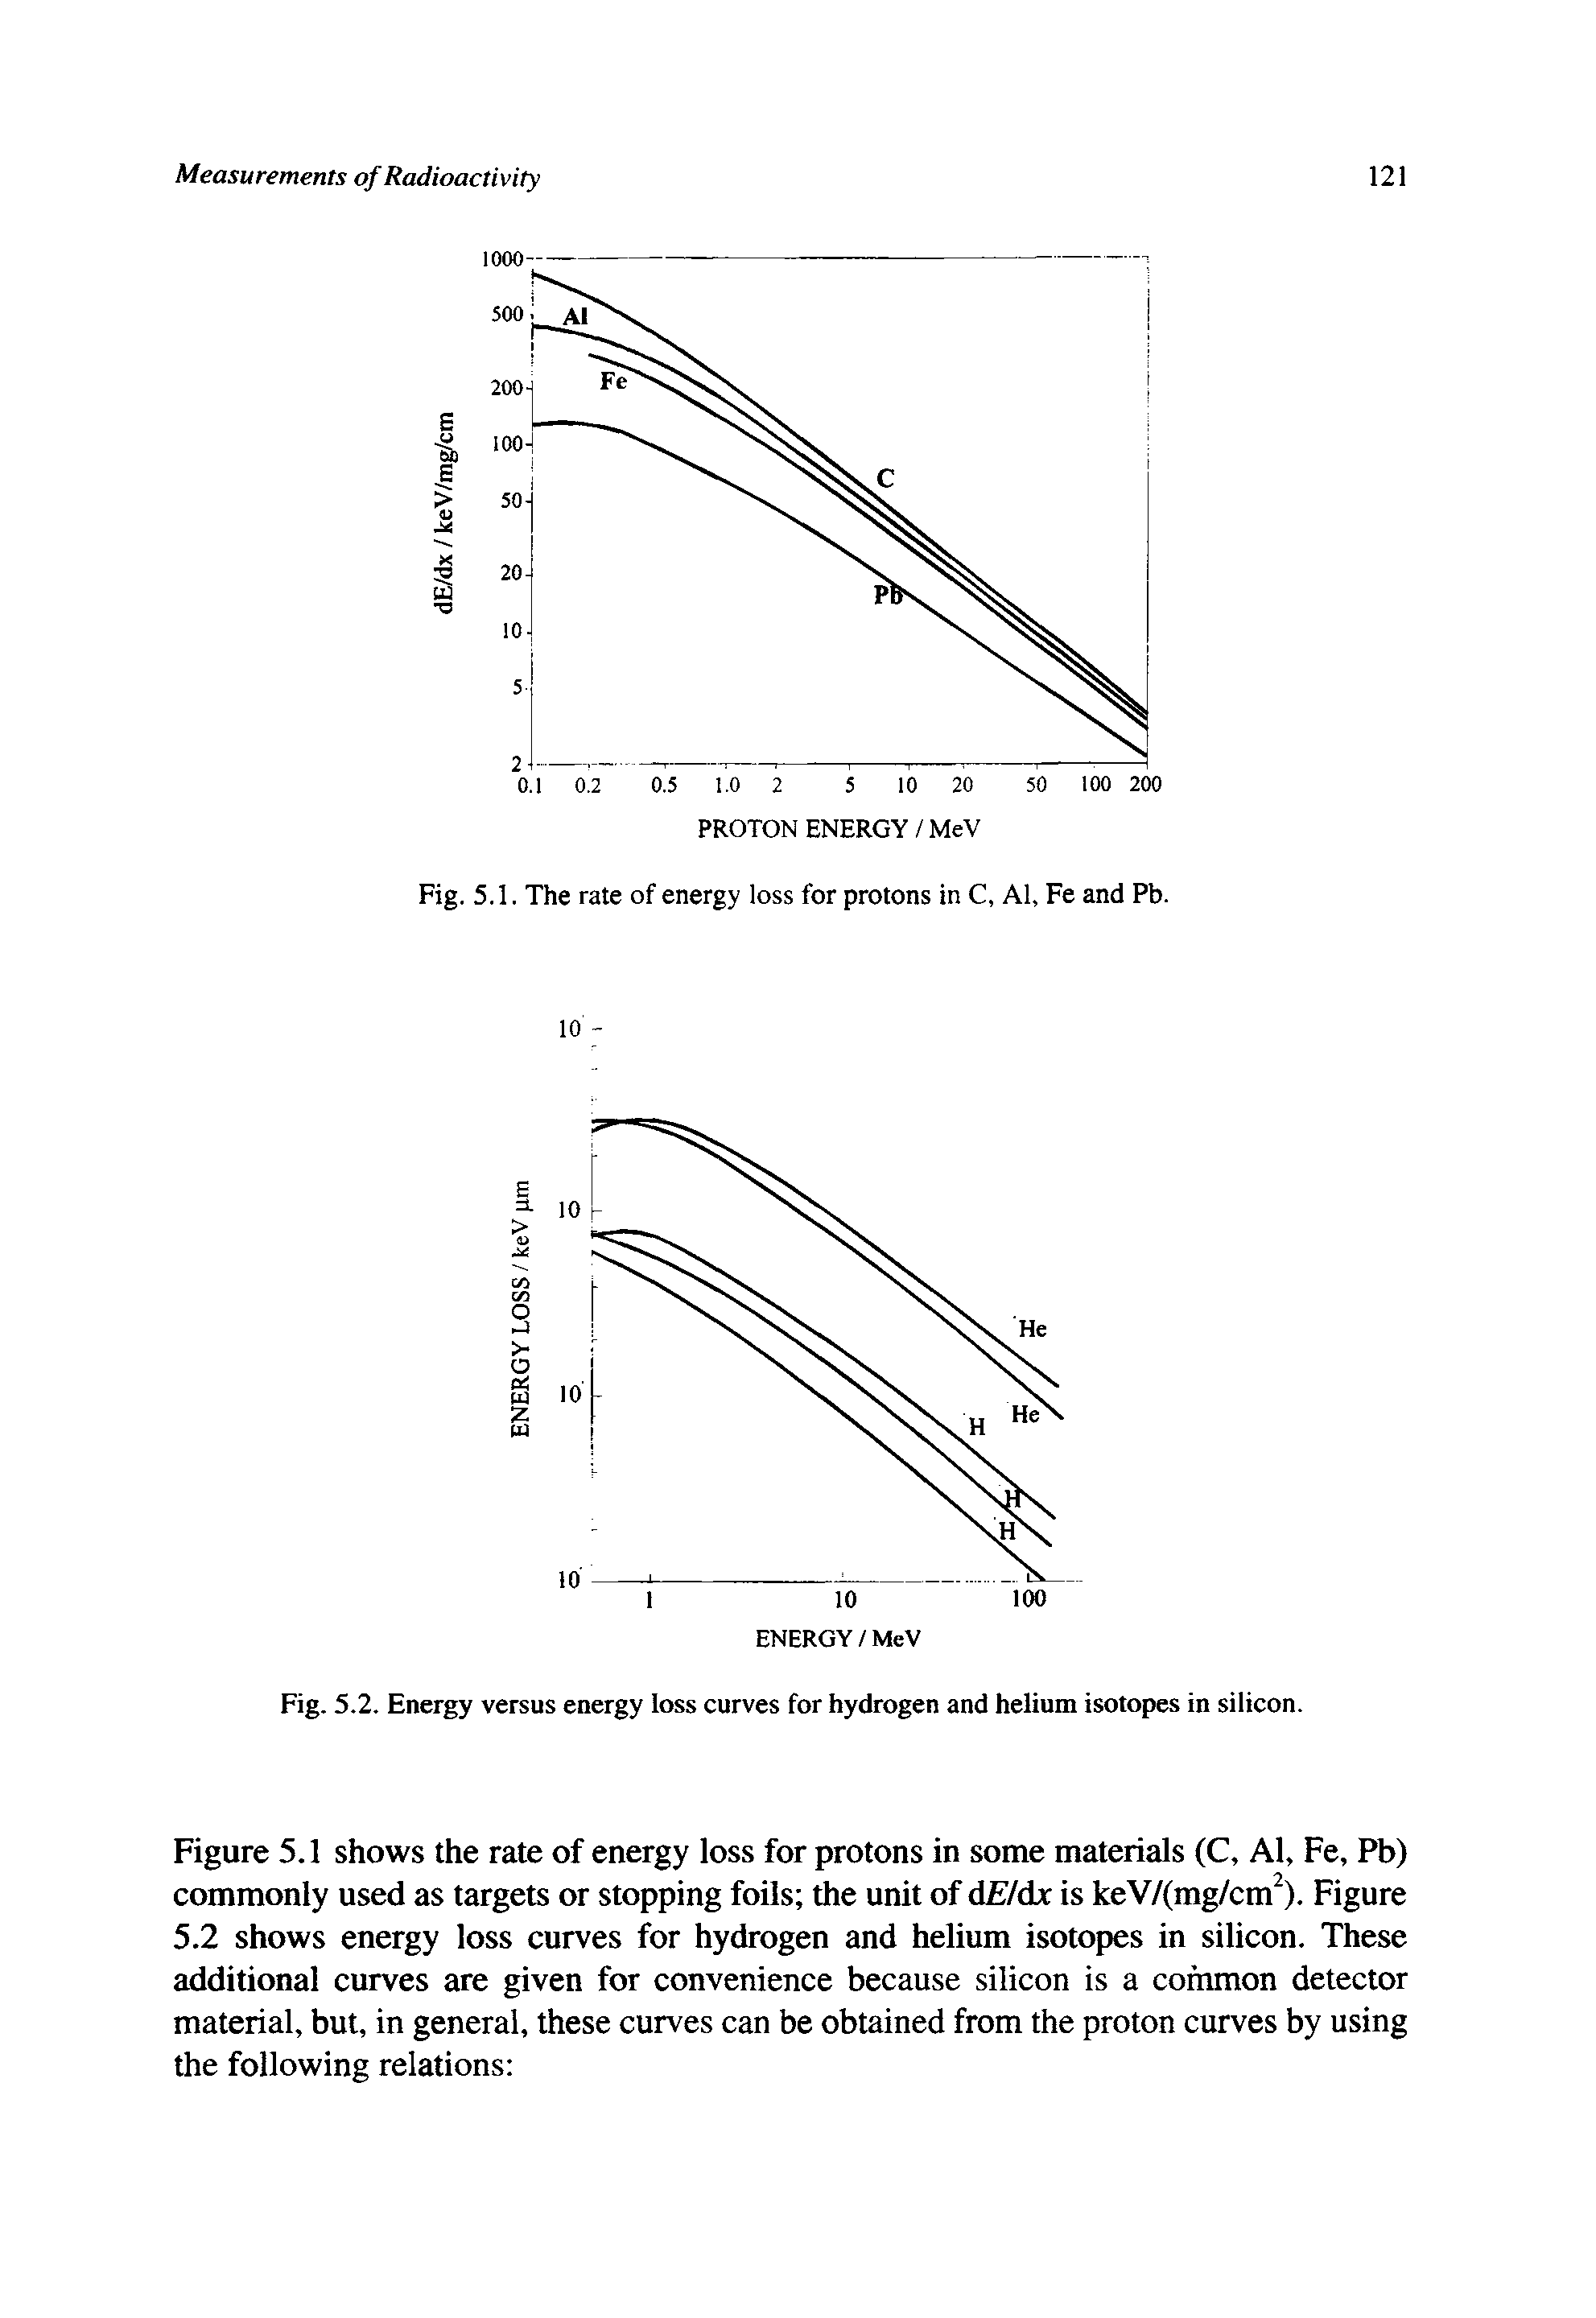 Fig. 5.2. Energy versus energy loss curves for hydrogen and helium isotopes in silicon.